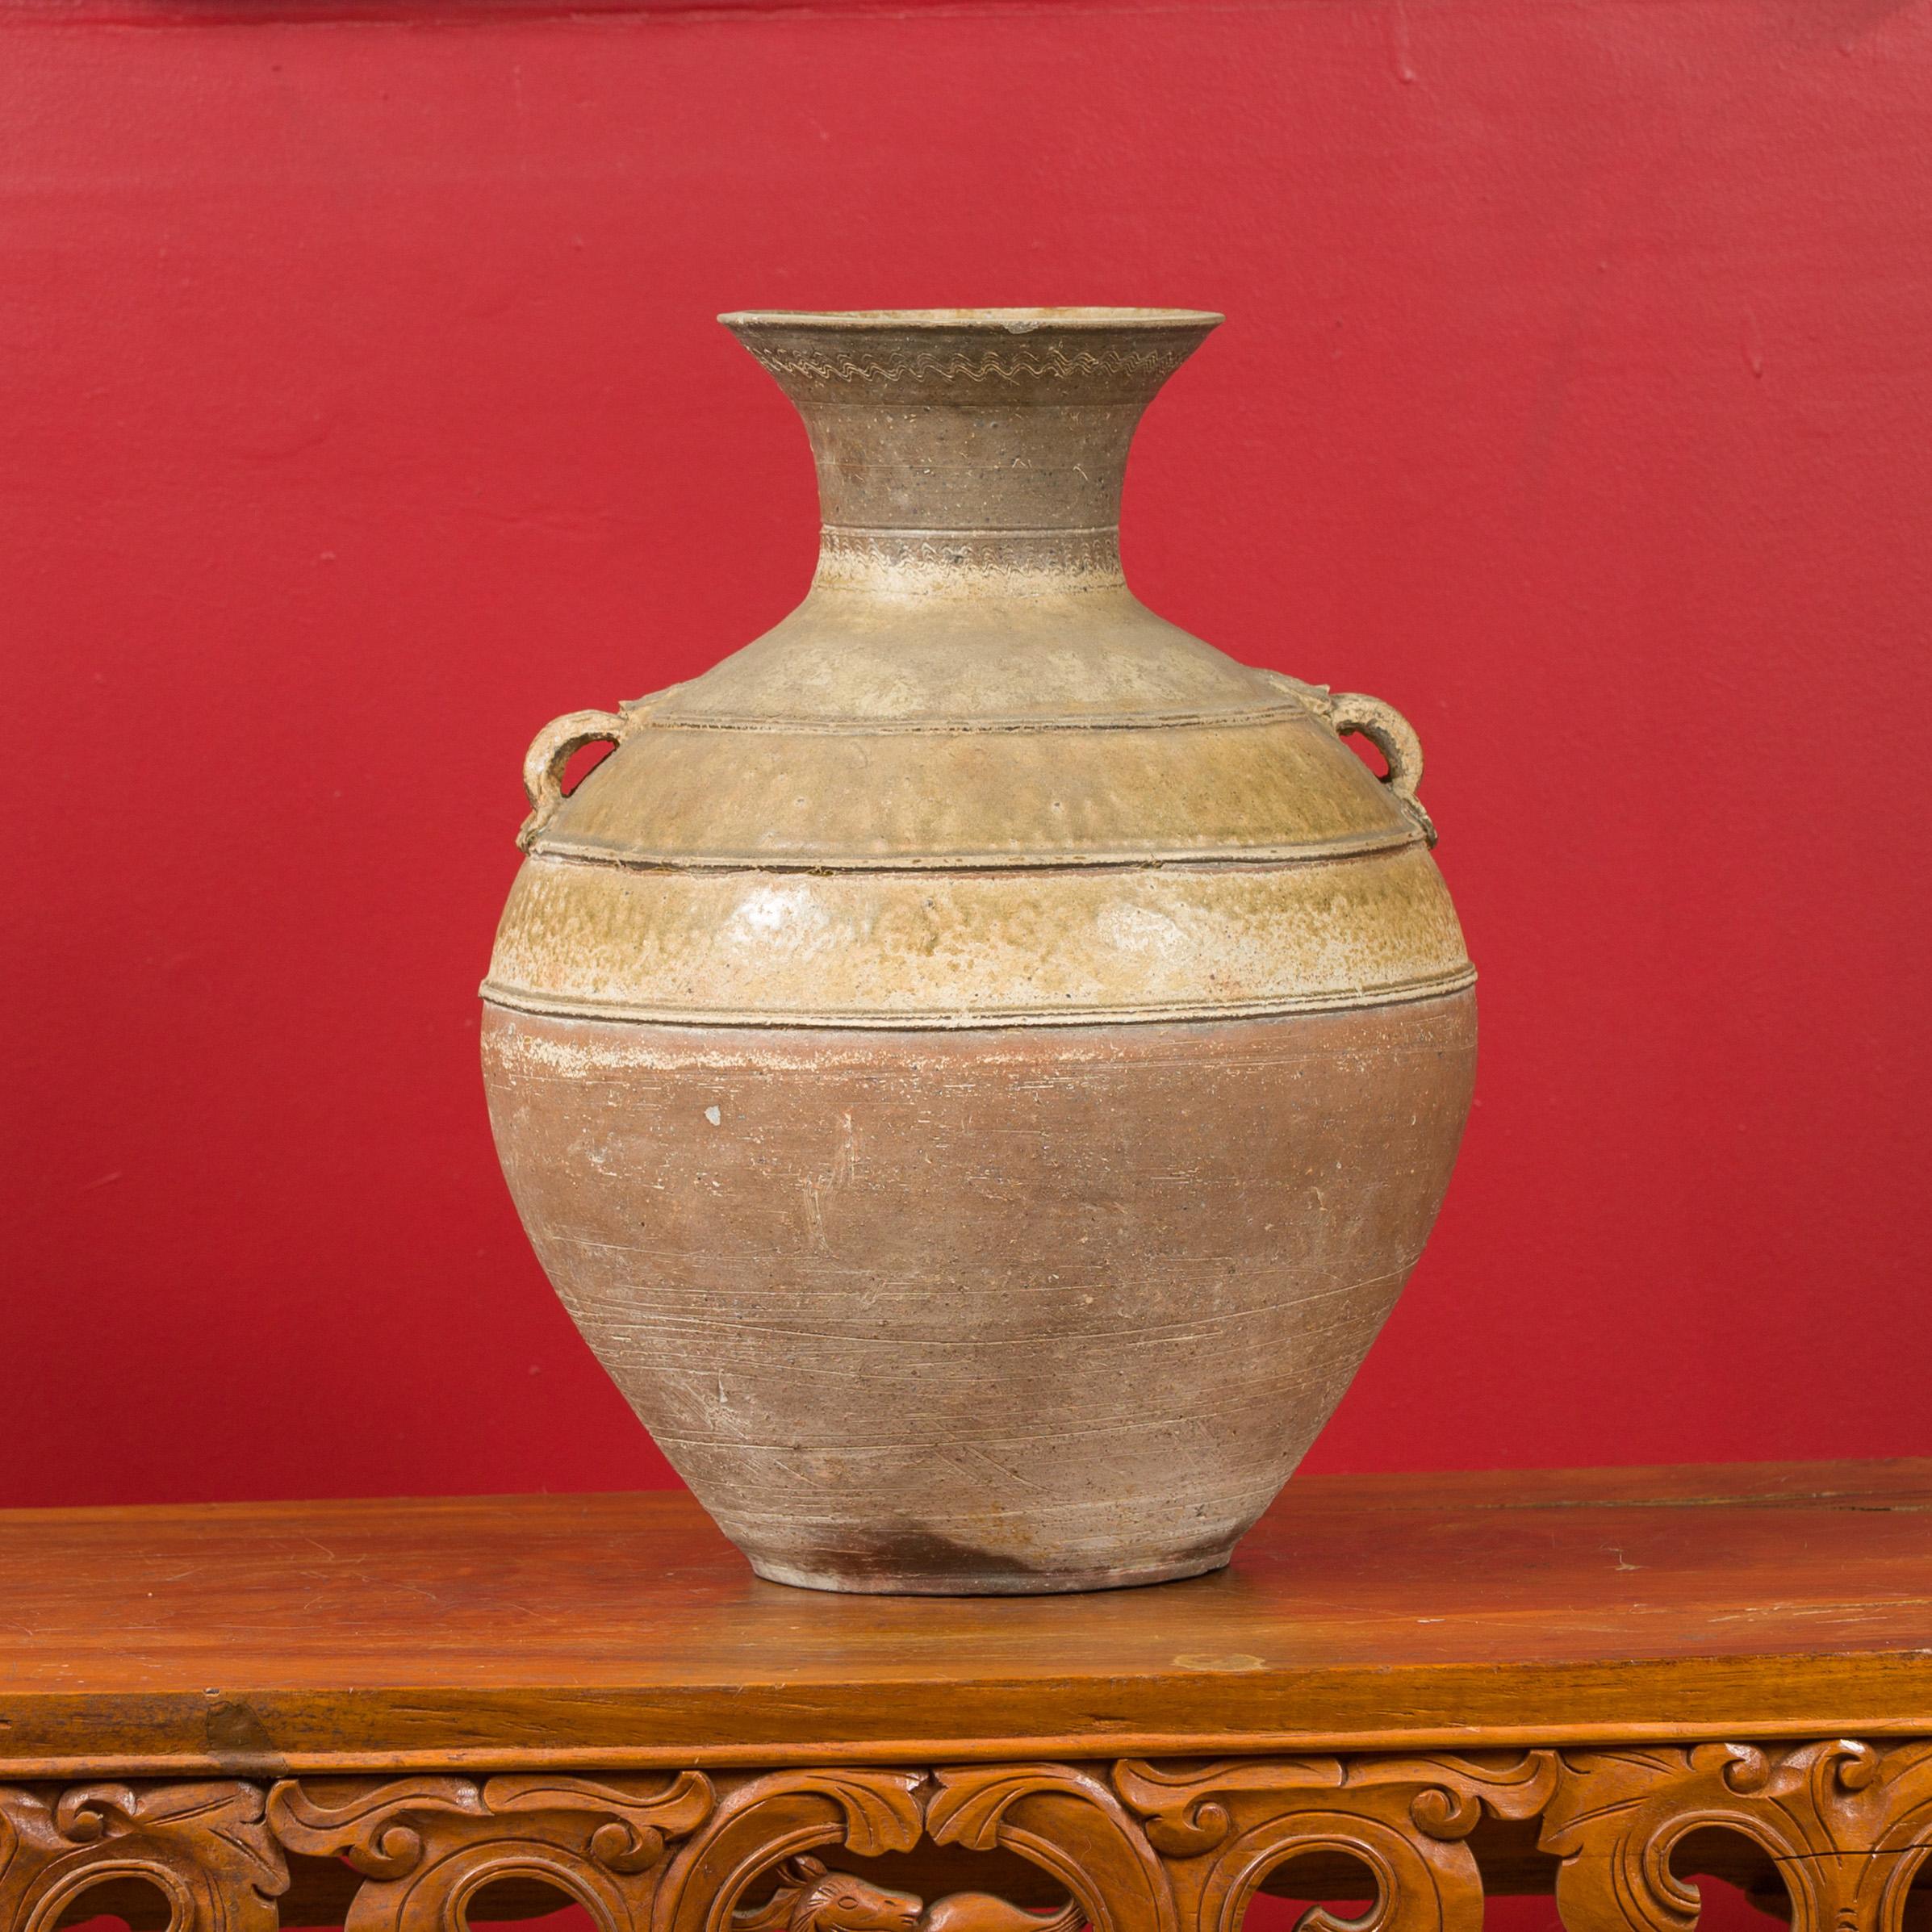 A Chinese Han dynasty period glazed ceramic Hu vessel circa 202 BC-200 AD, with petite decorative handles and wavy motifs. Crafted in China during the Han dynasty, this wine vessel, called a Hu vessel, features a circular belly topped with a narrow